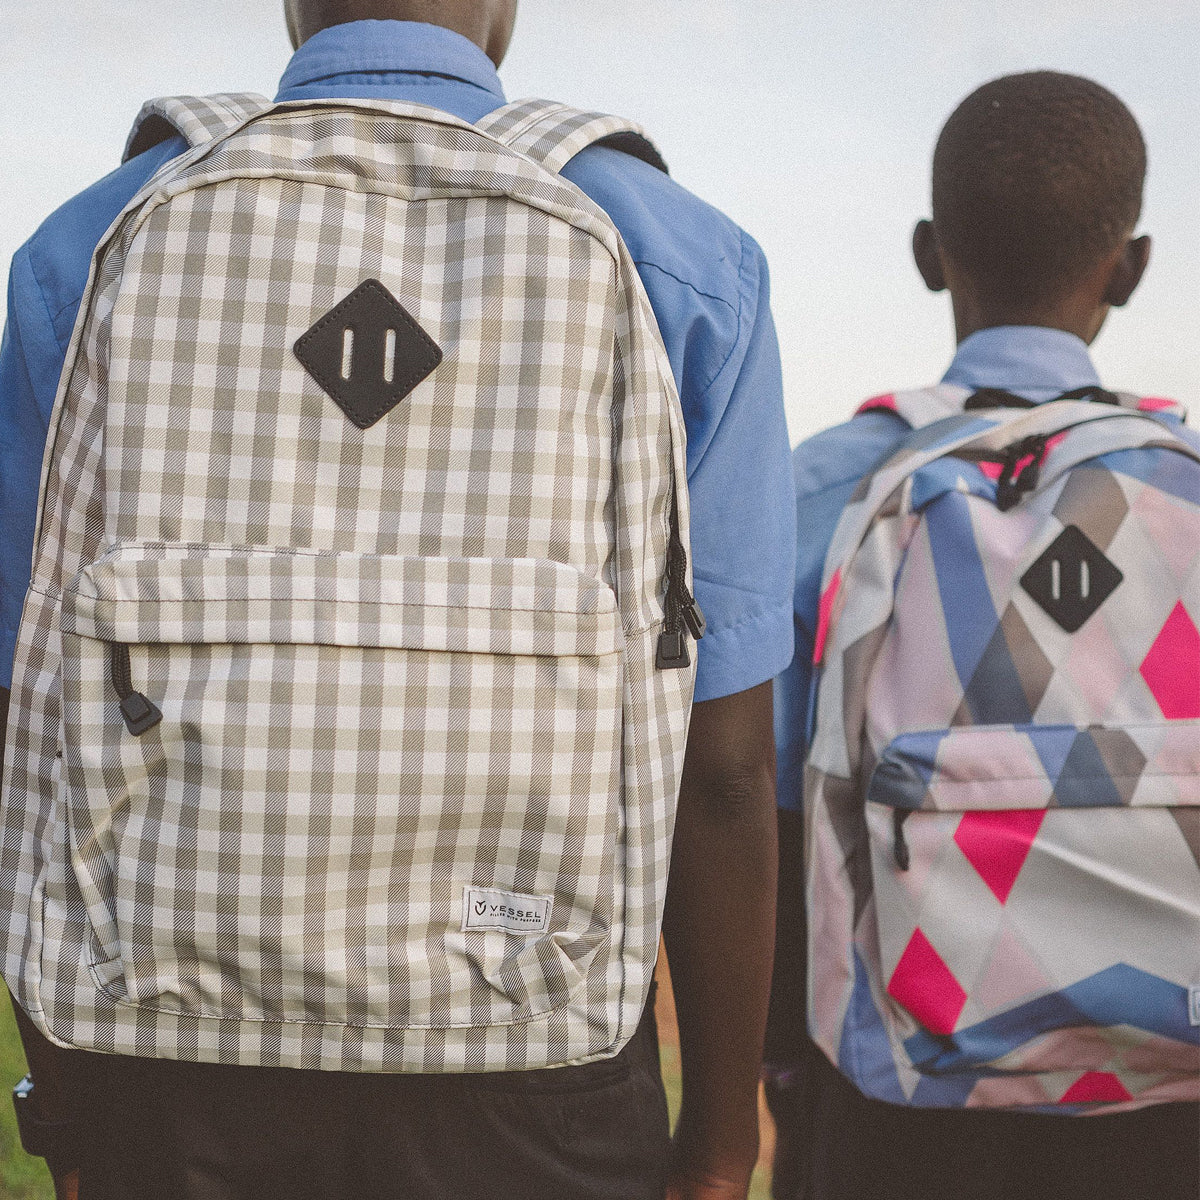 Two students carrying backpacks on their backs while walking outside 